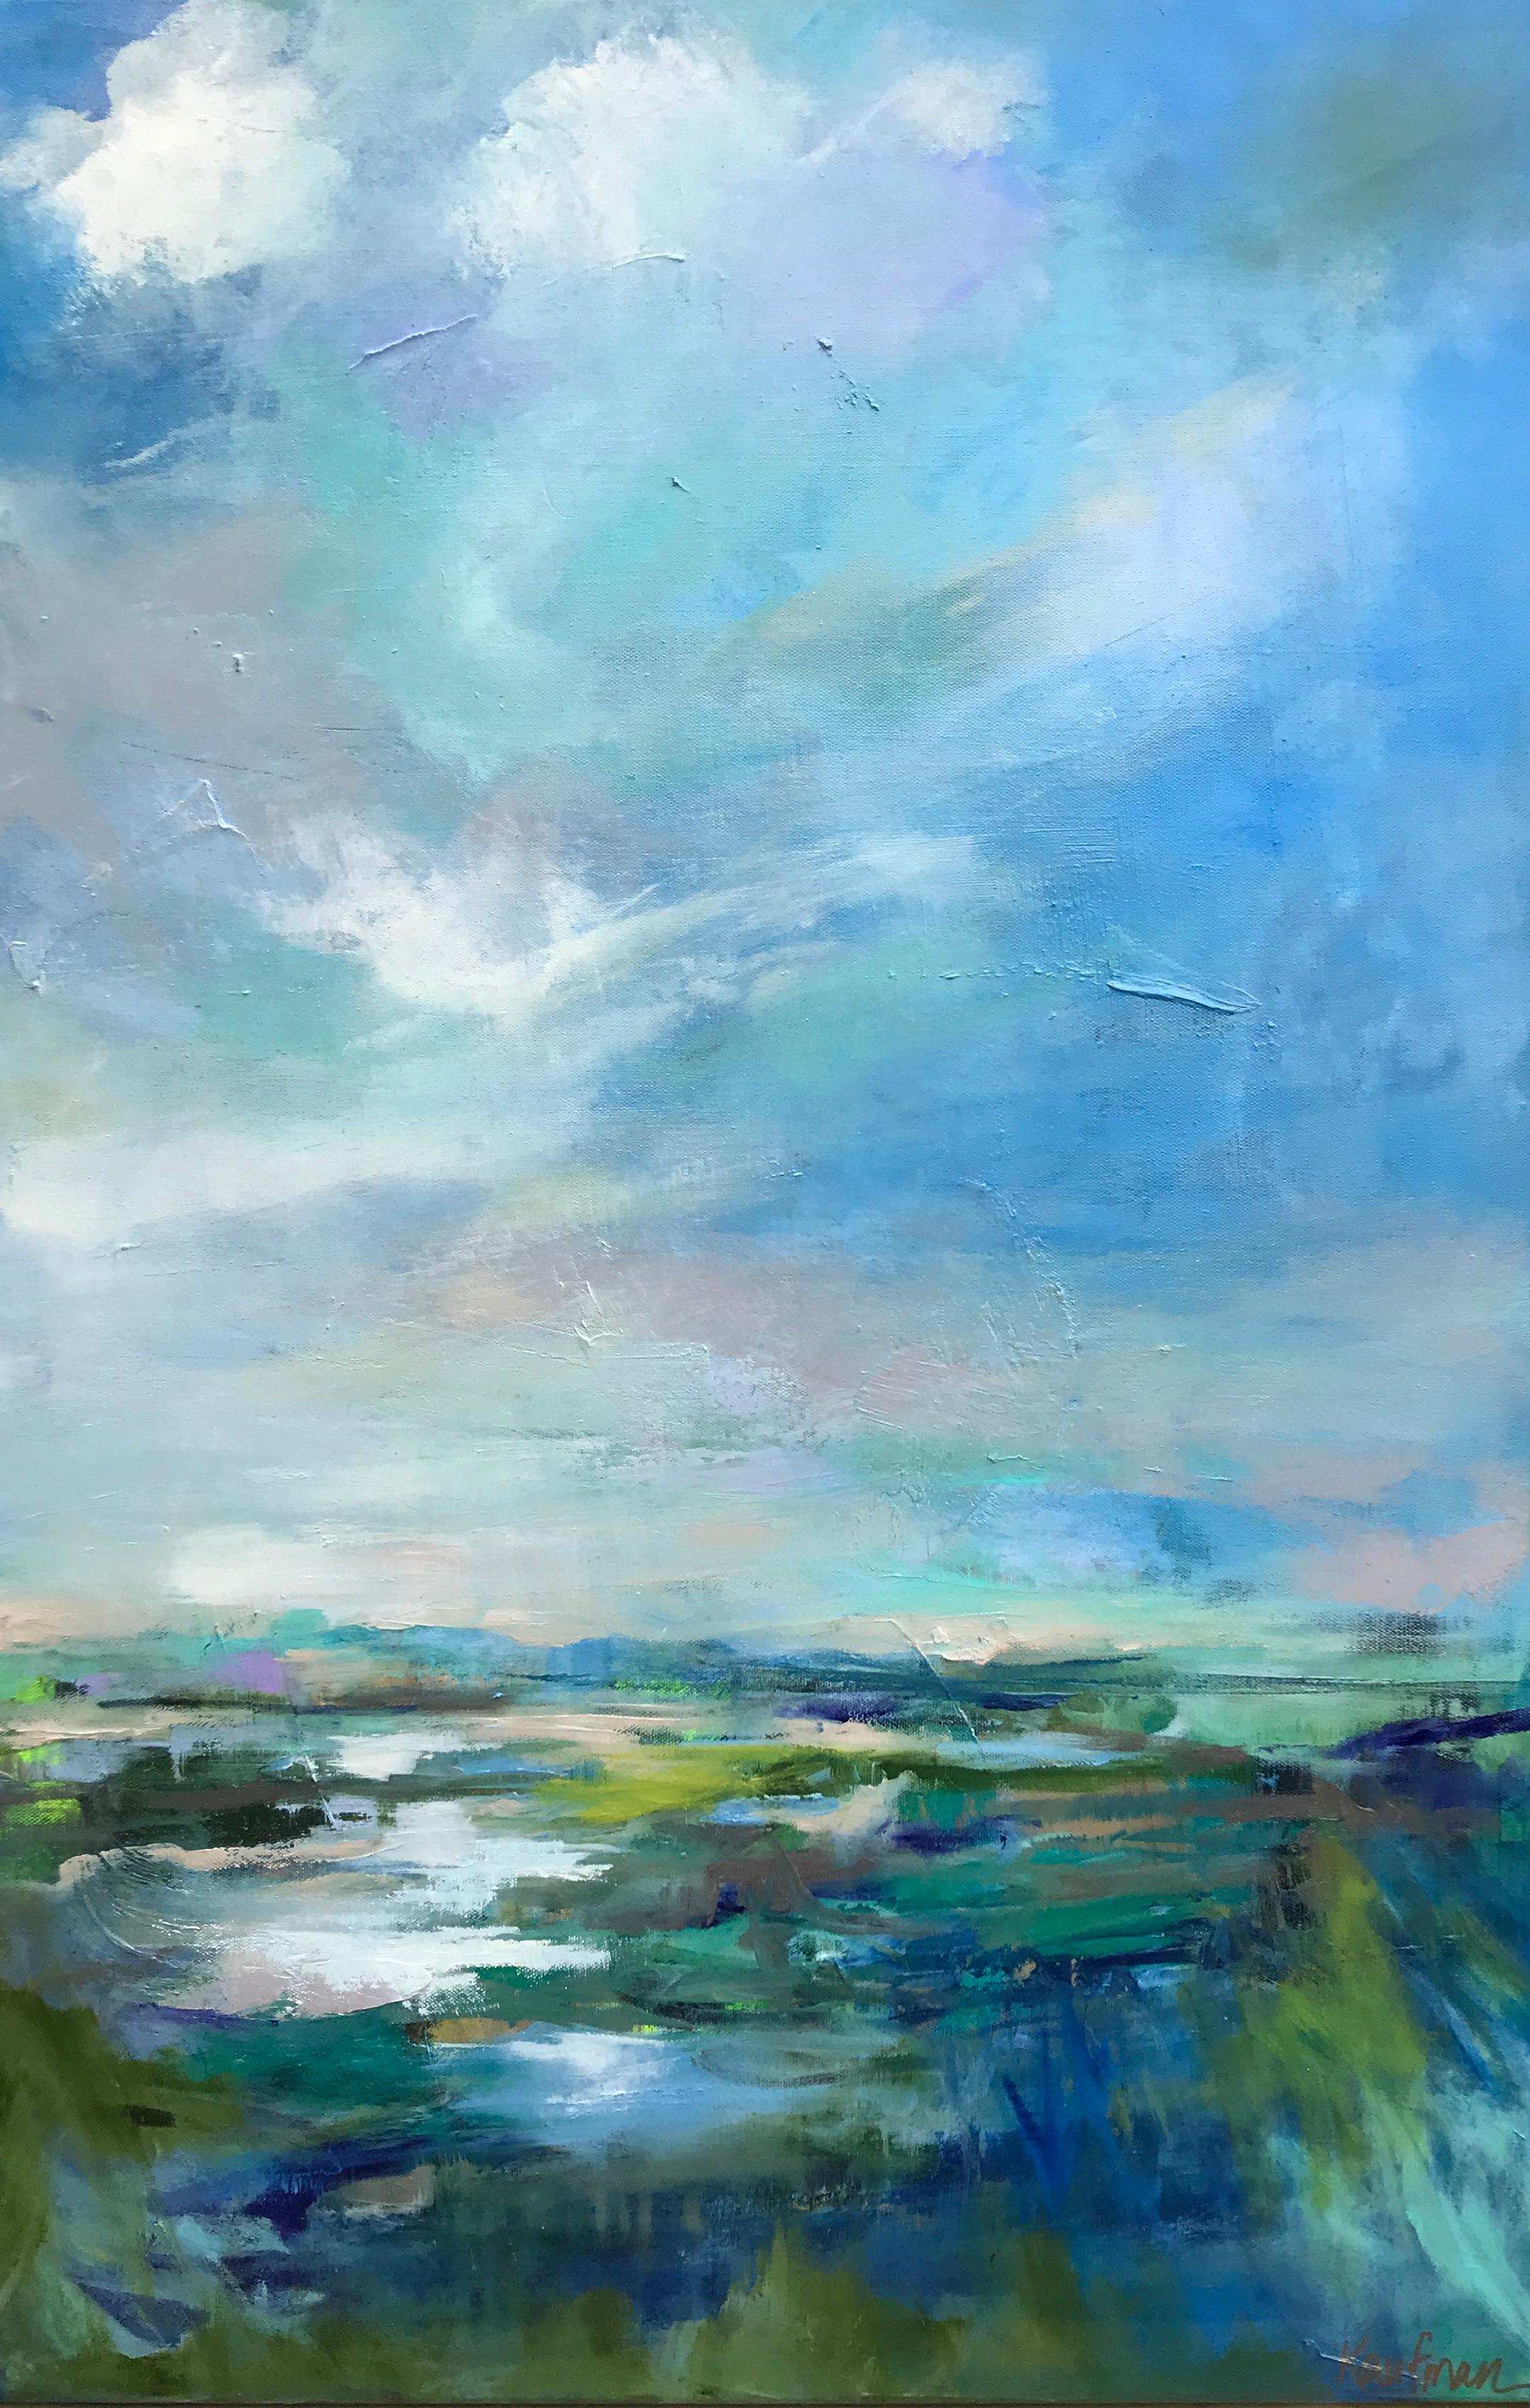 'Engulfed I' is a vertical framed contemporary landscape painting created by American artist Kelli Kaufman in 2018. Featuring an exquisite palette made of cold tonalities such as blue, green, purple and beige, the painting evokes the beauty of the